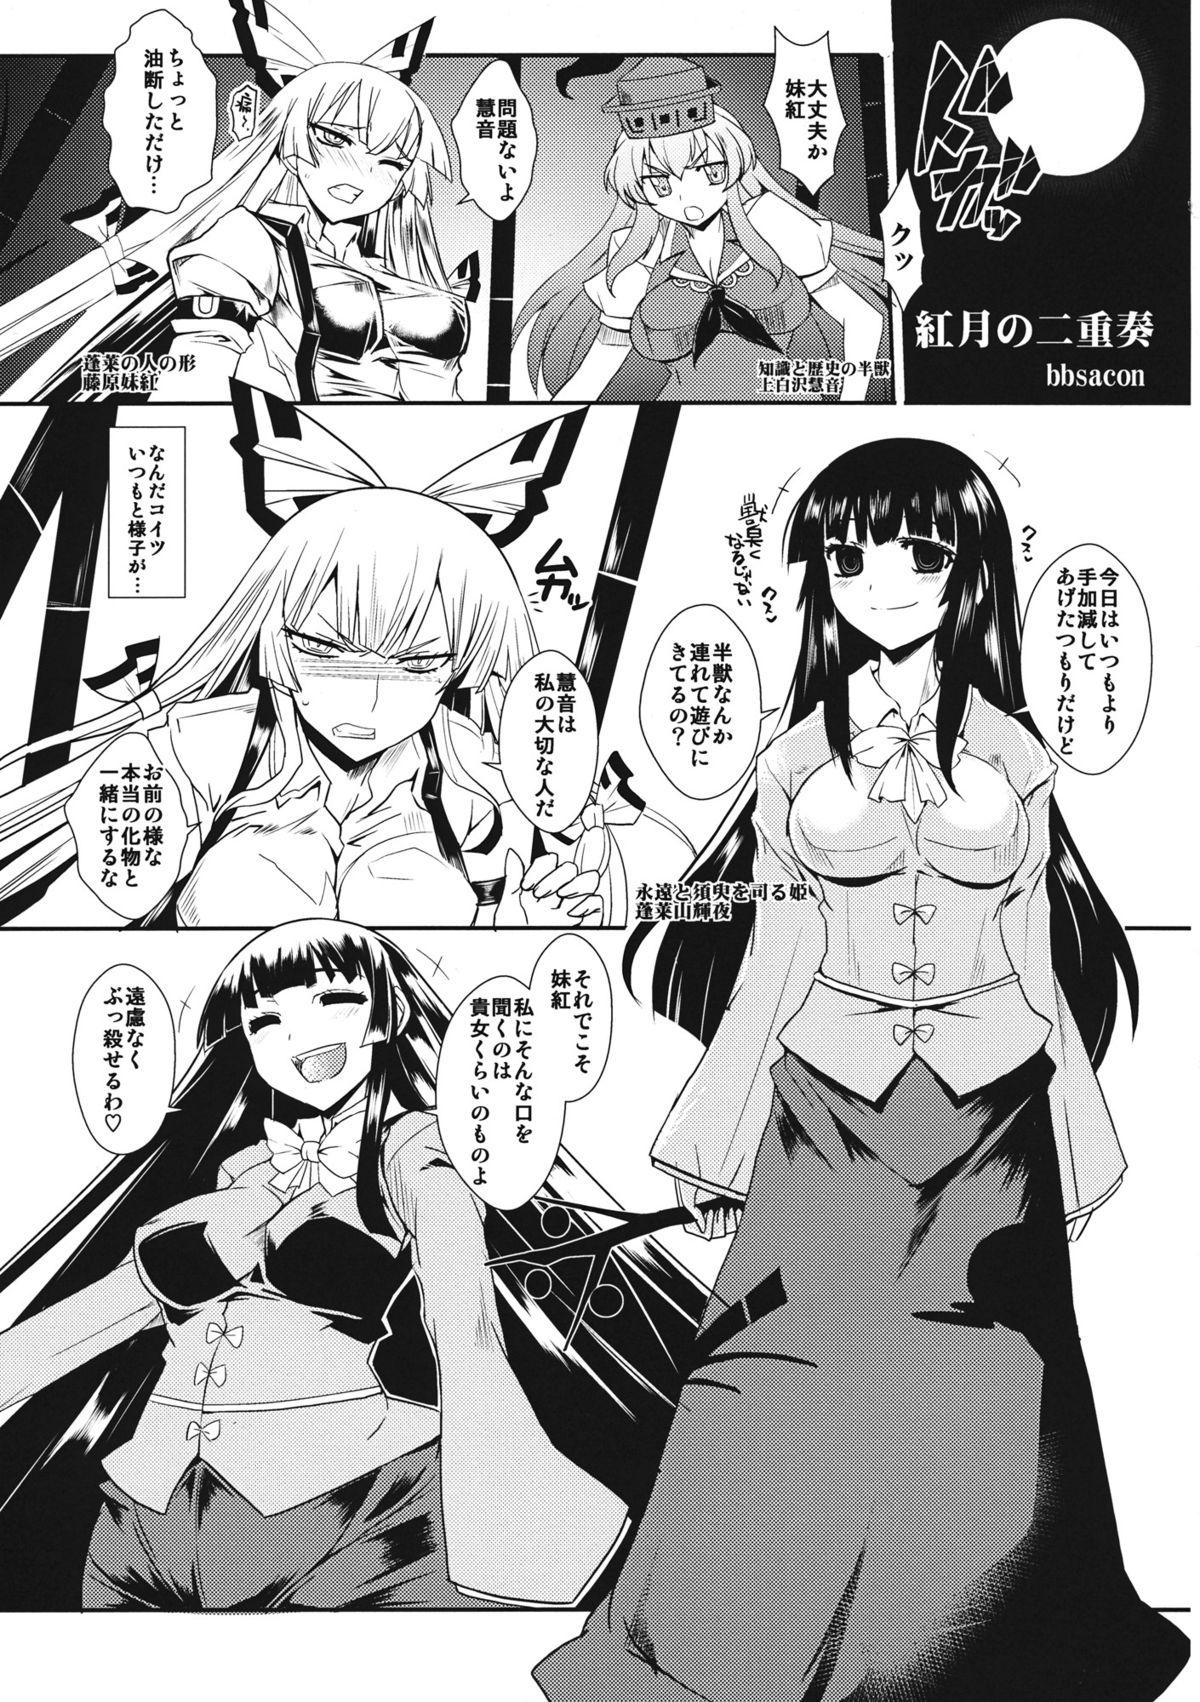 Licking Pussy 紅月の二重奏 - Touhou project Hot Women Having Sex - Page 2